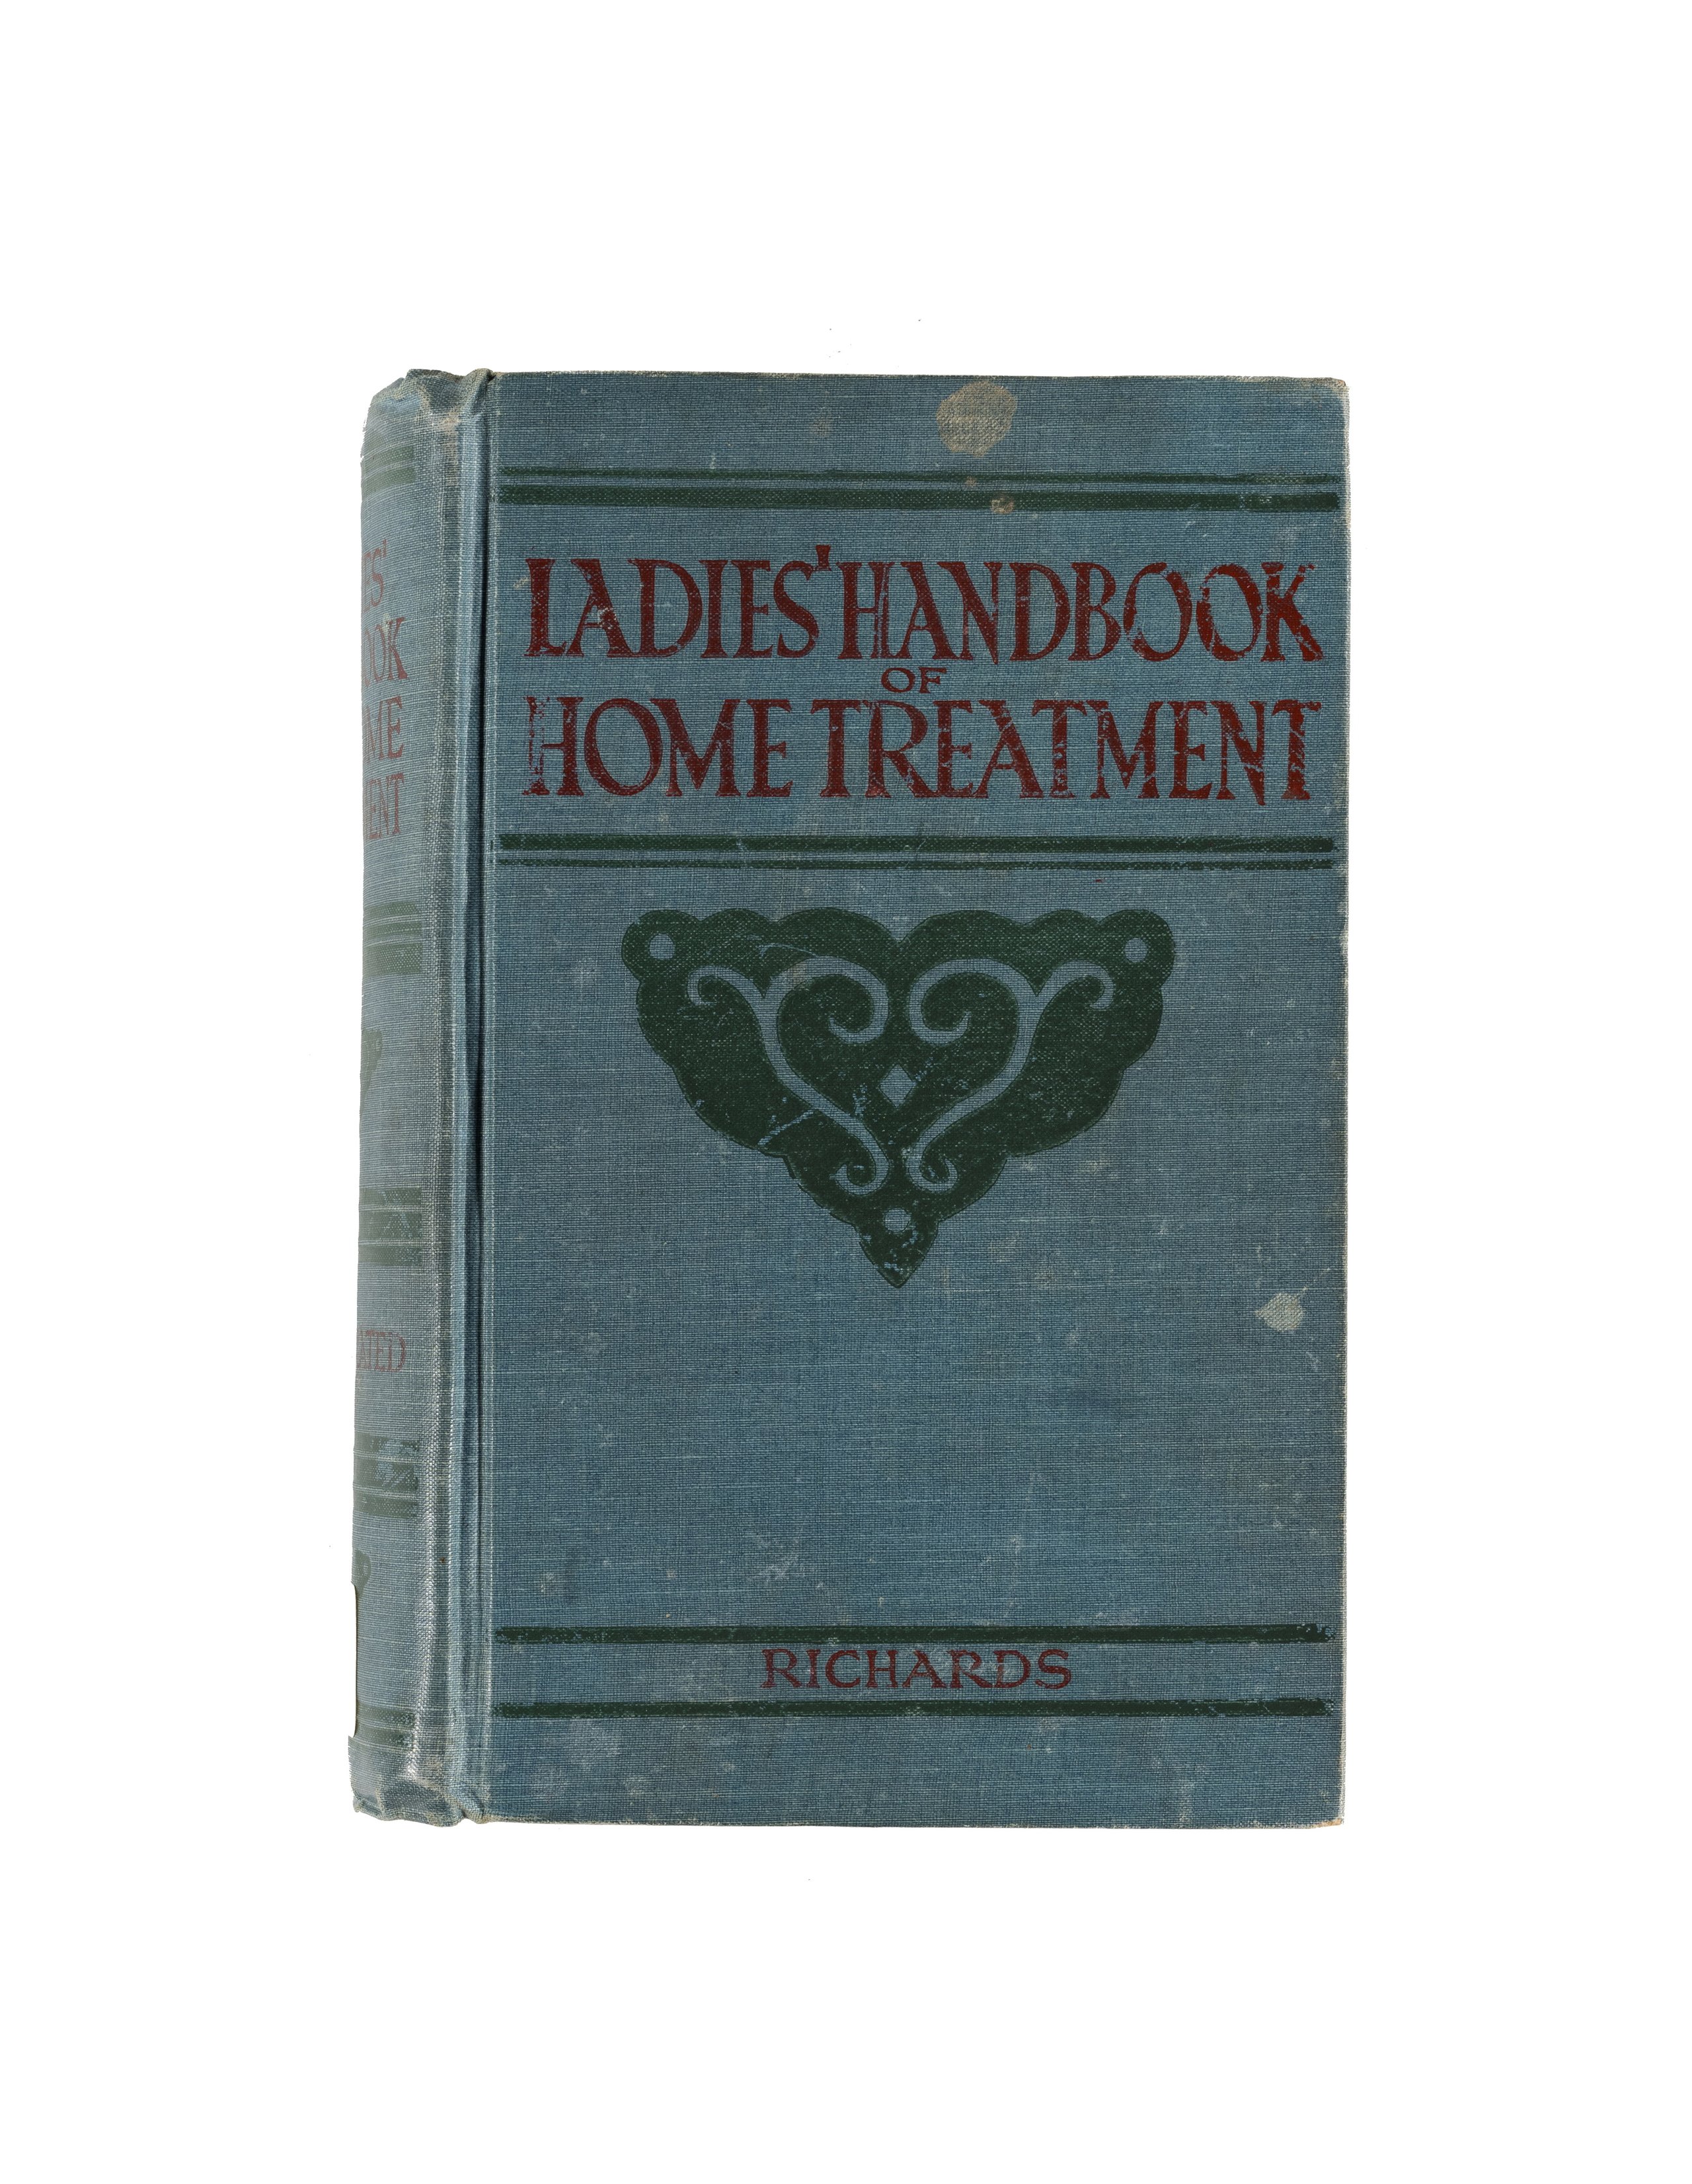 'Ladies Handbook of Home Treatment' by Richards and Richards